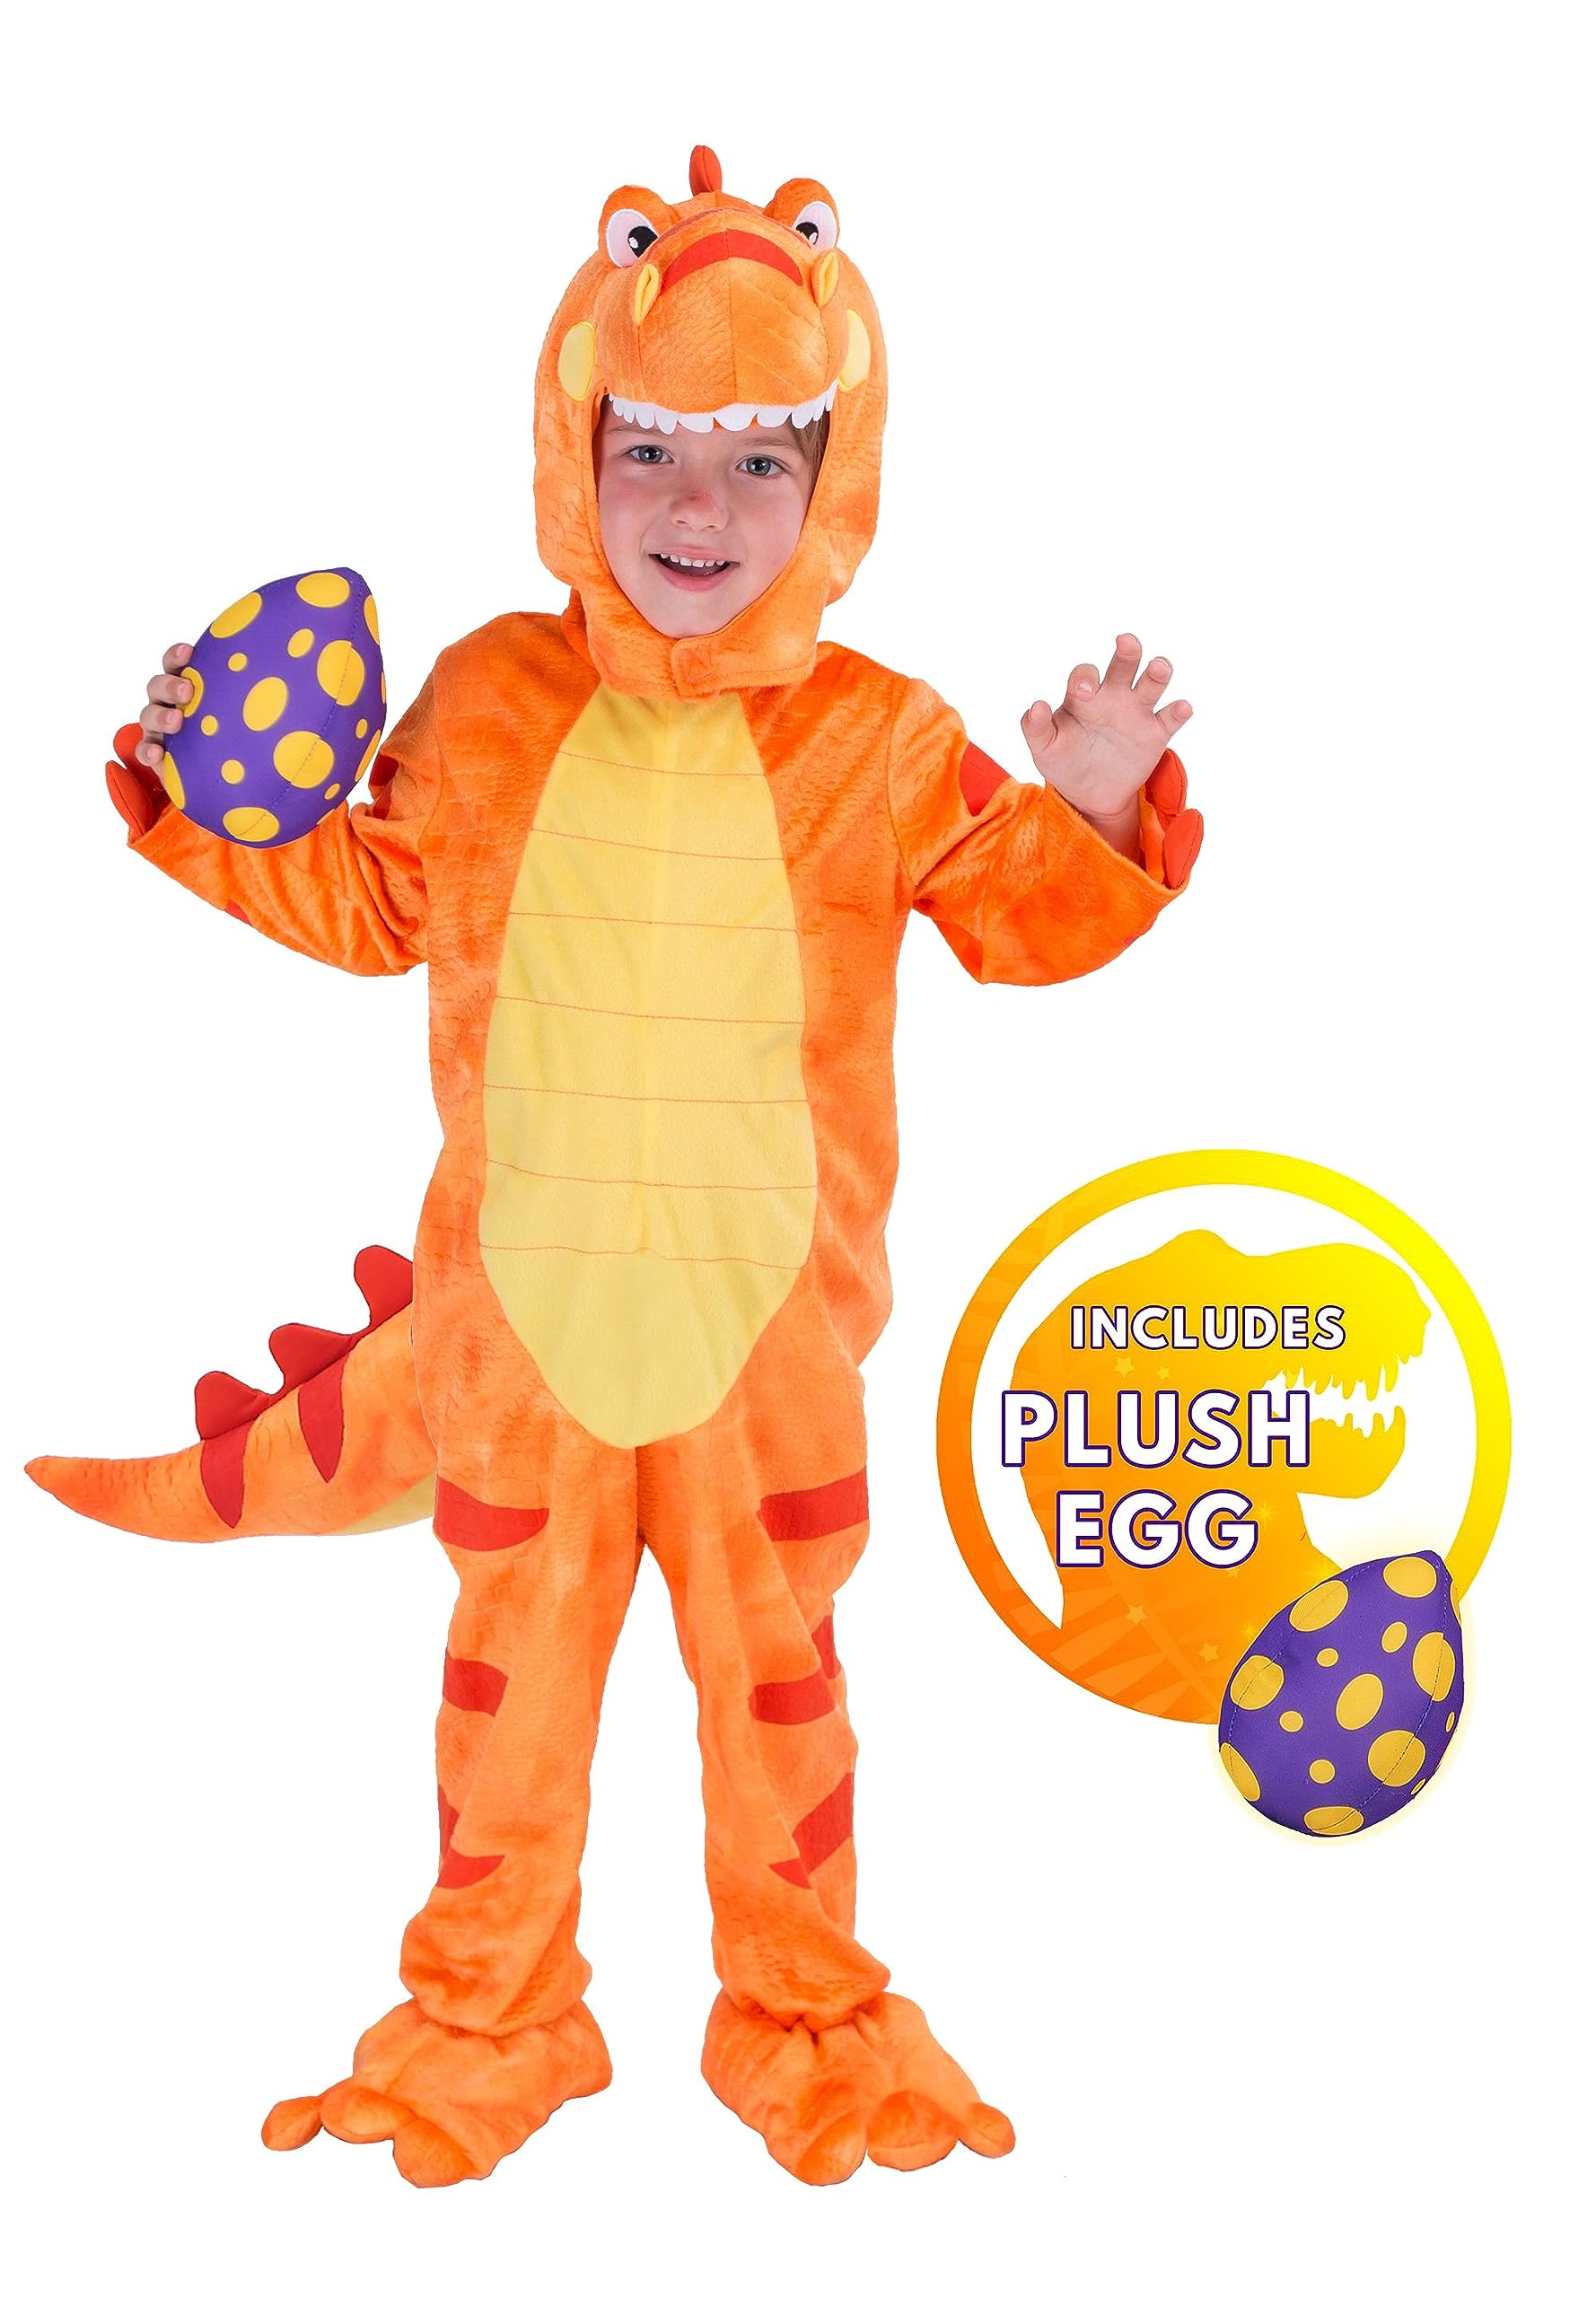 Spooktacular Creations Child Orange Dinosaur T-Rex Costume with Toy Dinosaur Egg for Halloween Dress up, Dinosaur Theme Party (Small (5-7 yrs))